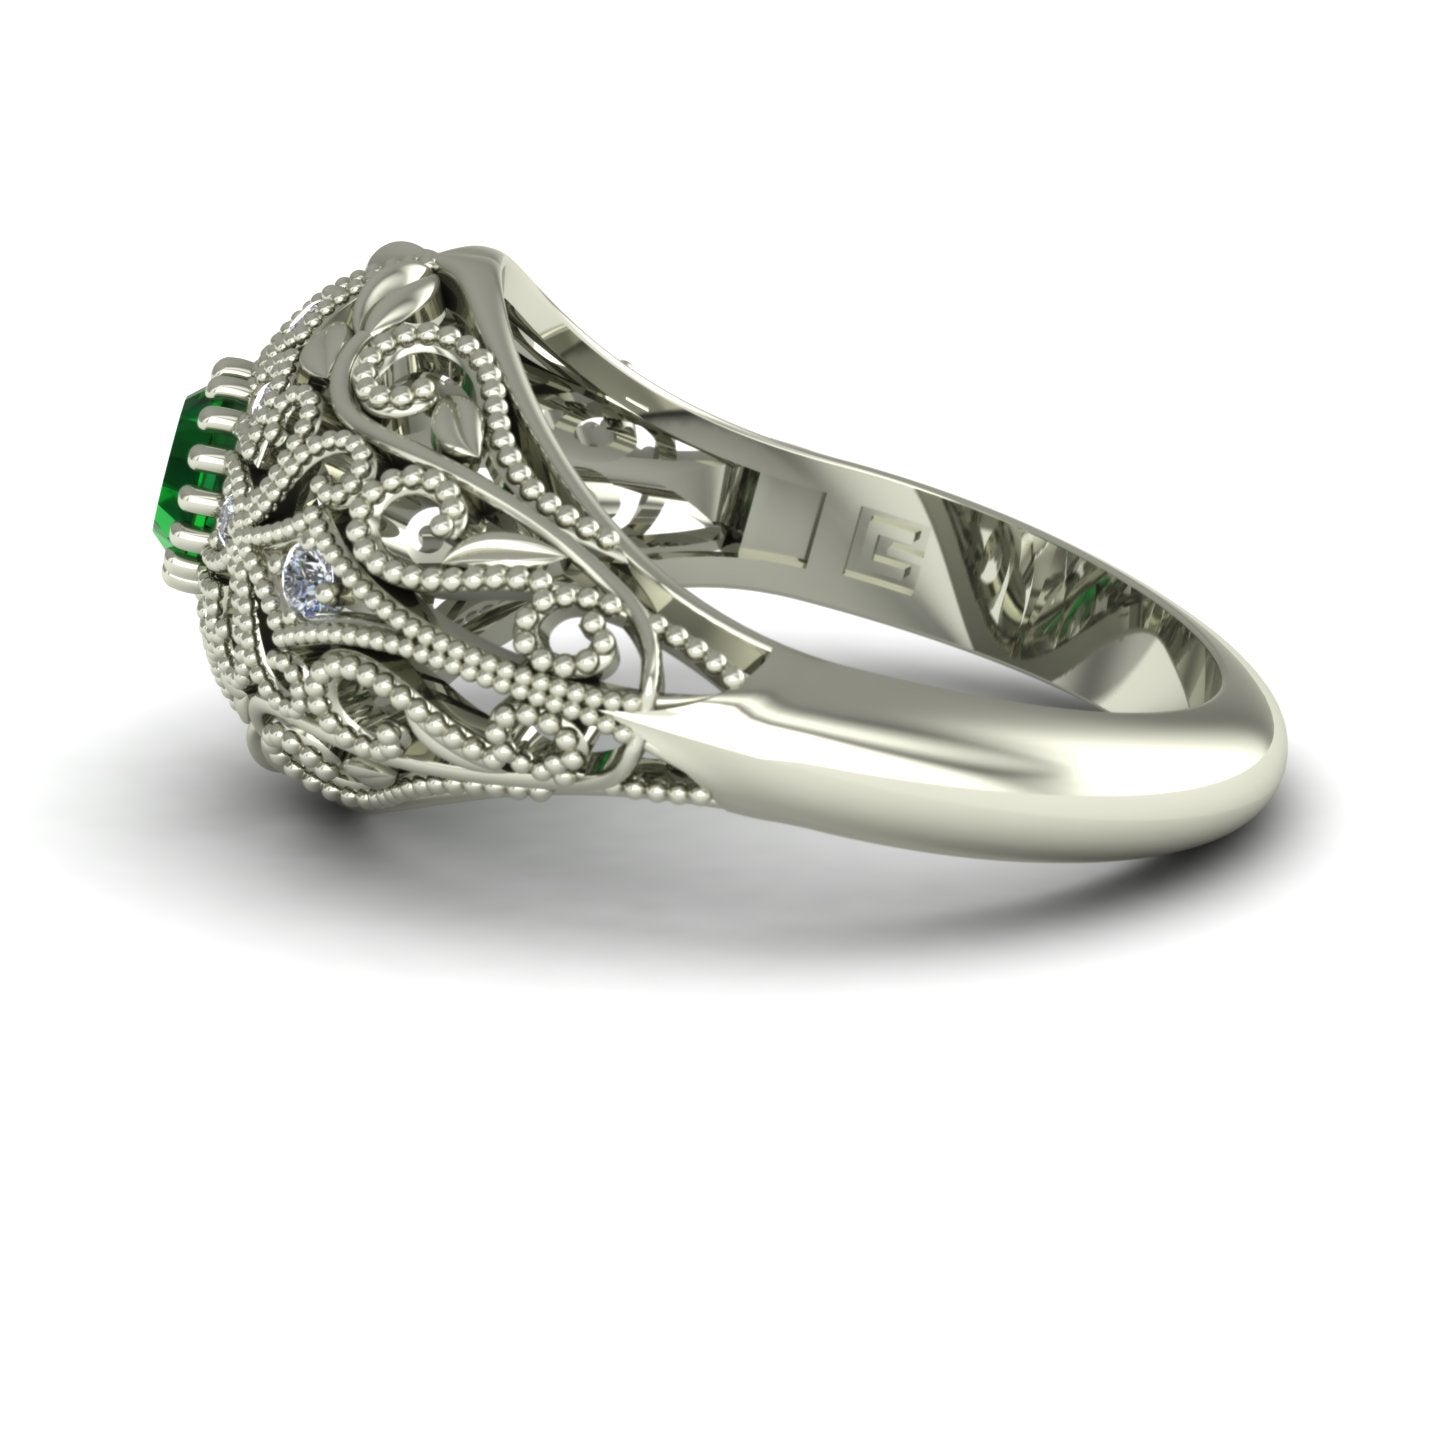 Emerald and diamond dome ring with leaves and vines in 14k white gold - Charles Babb Designs - side view